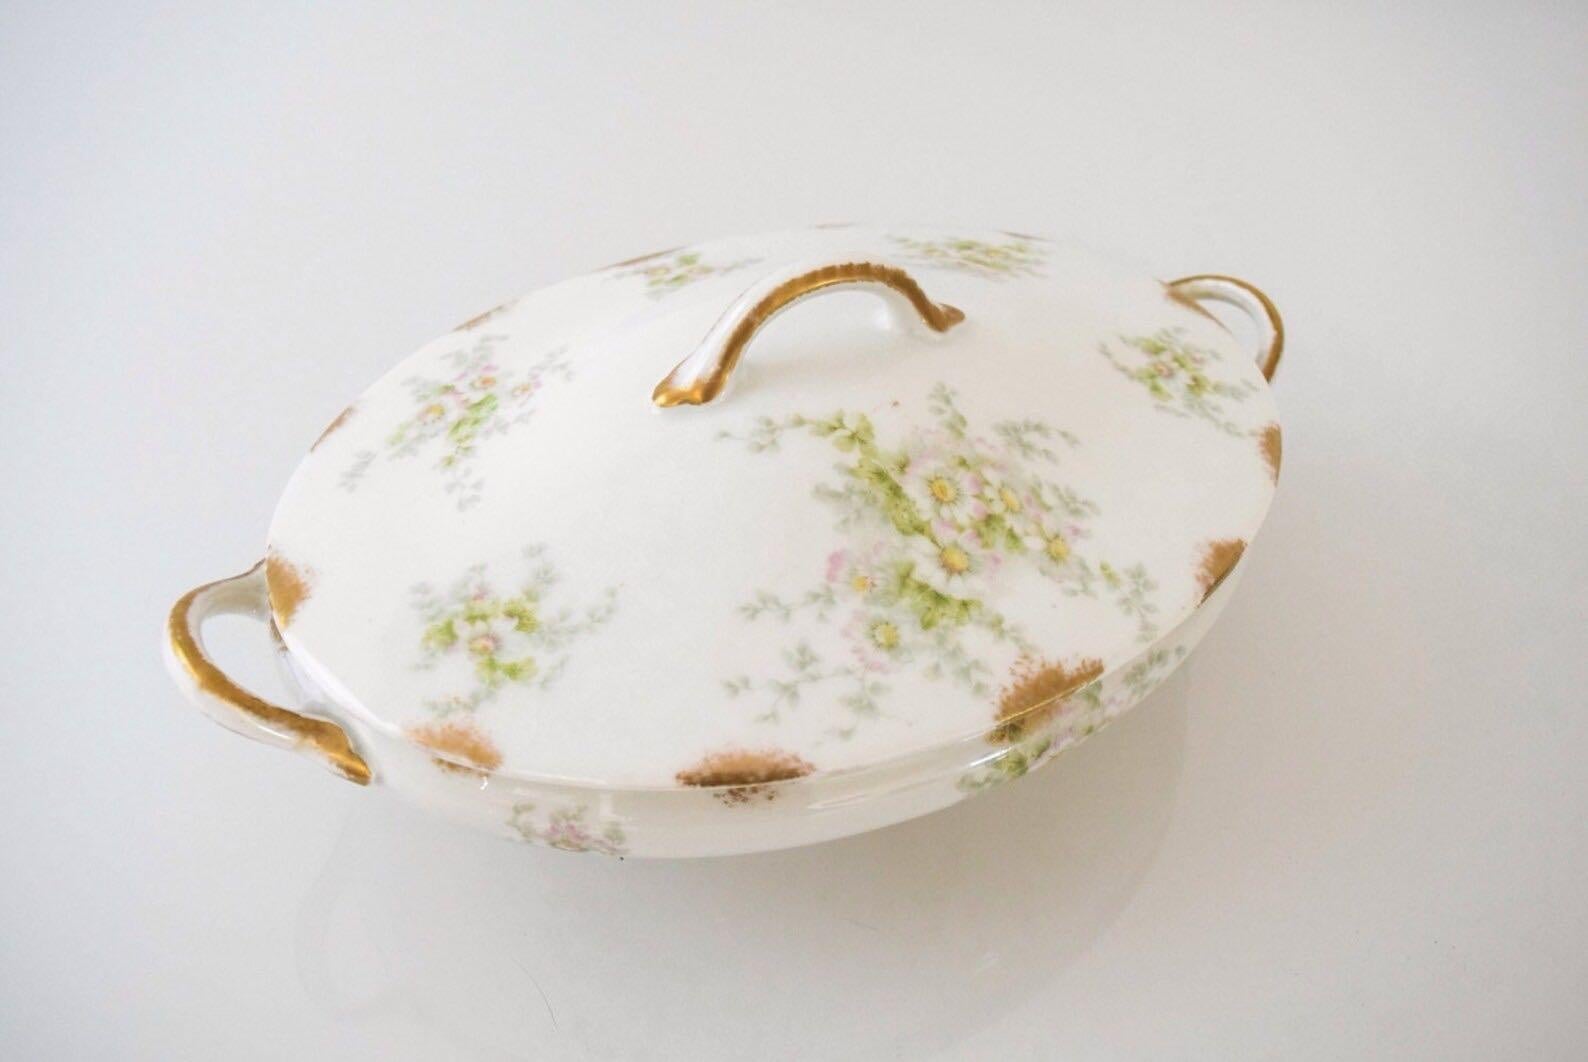 Country Antique Covered Serving Bowl or Tureen by Haviland Limoges For Sale